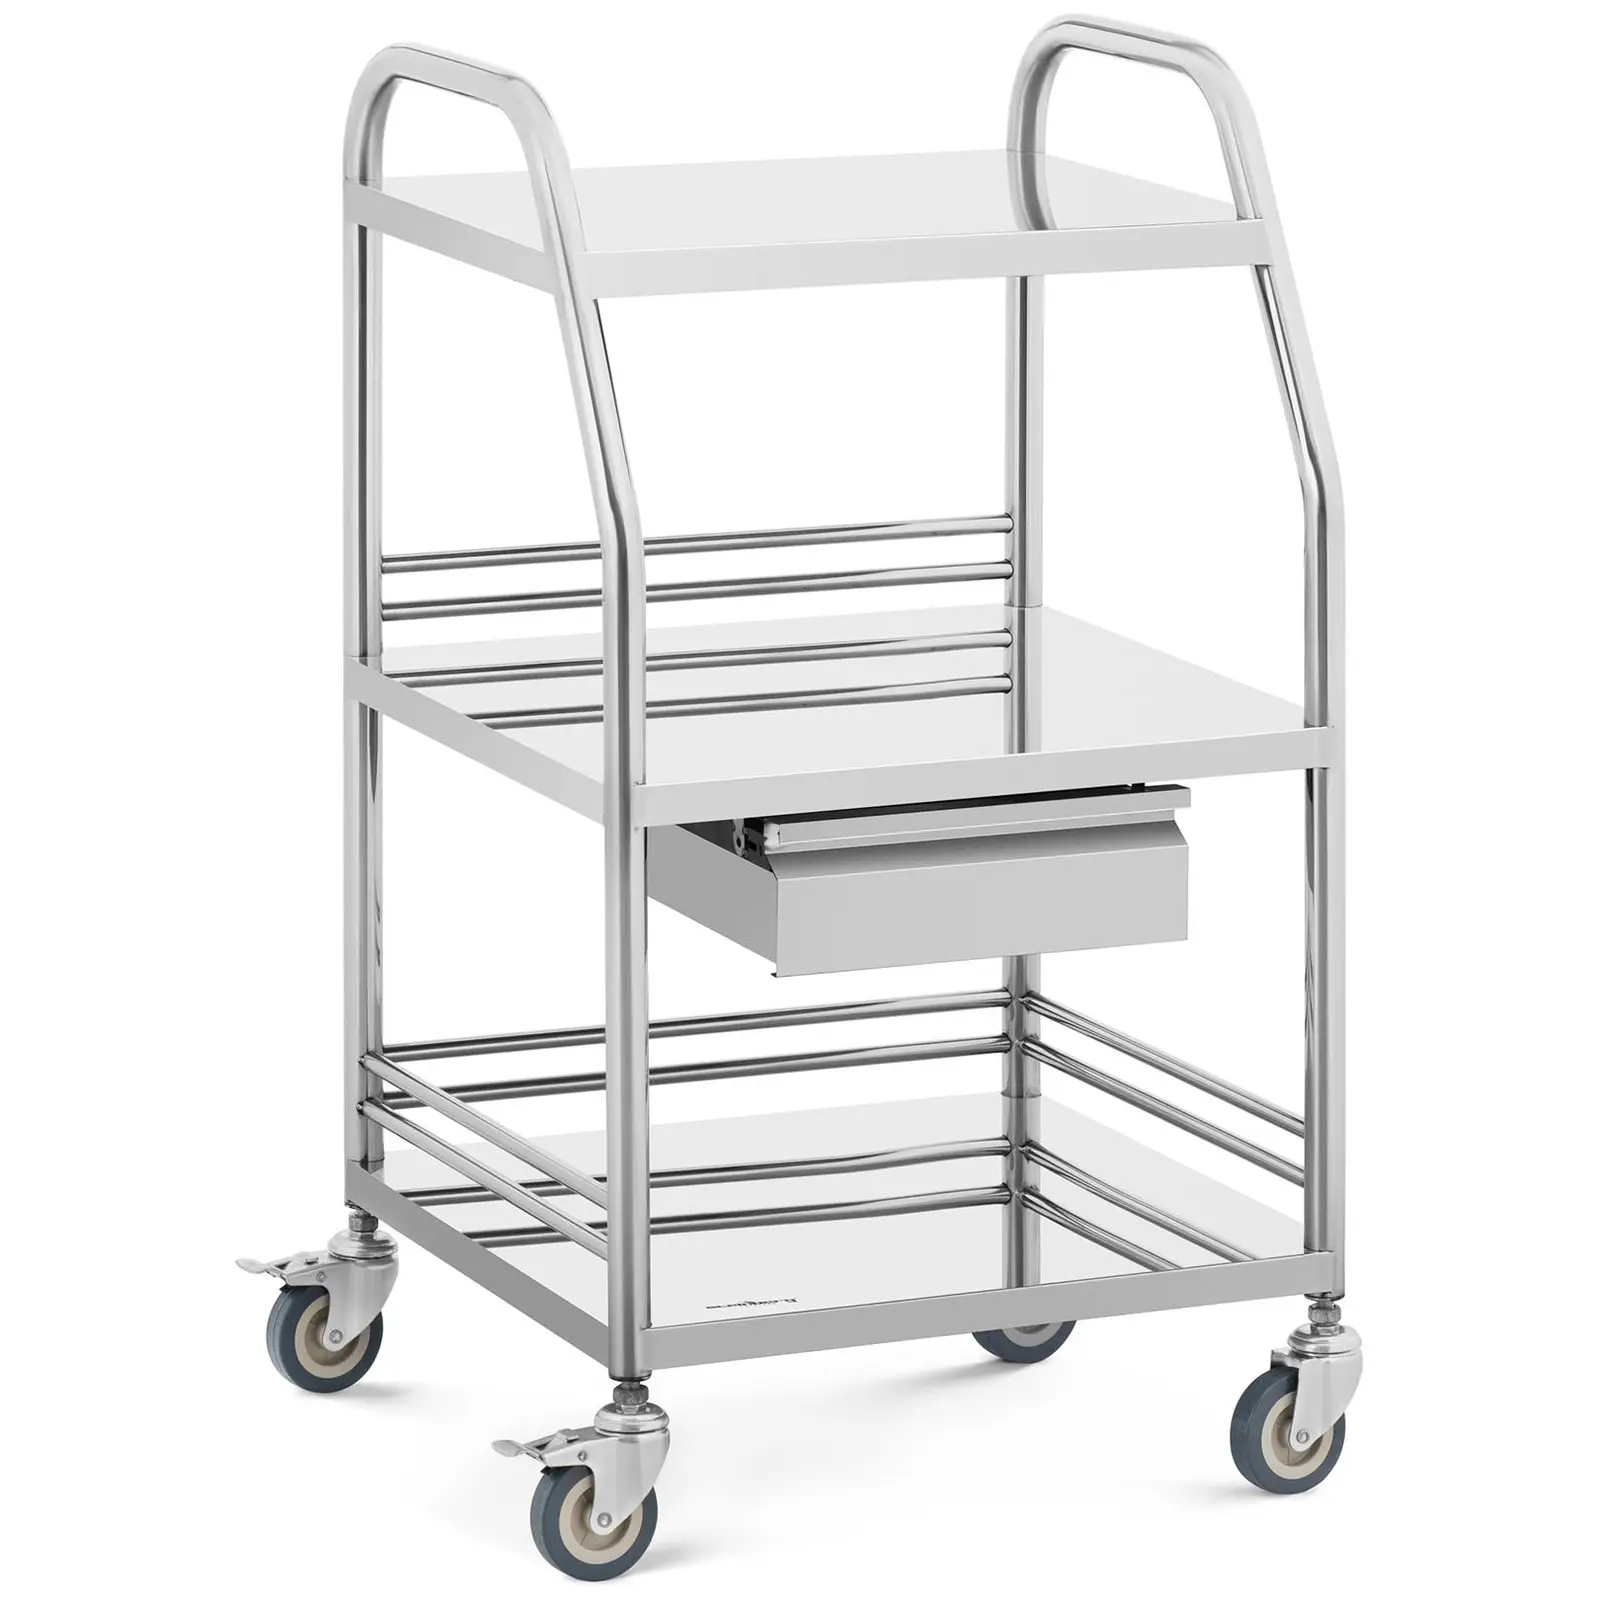 Laboratory Trolley - stainless steel - 3 shelves each 41 x 35 x 2.5 cm - 1 drawer - 30 kg